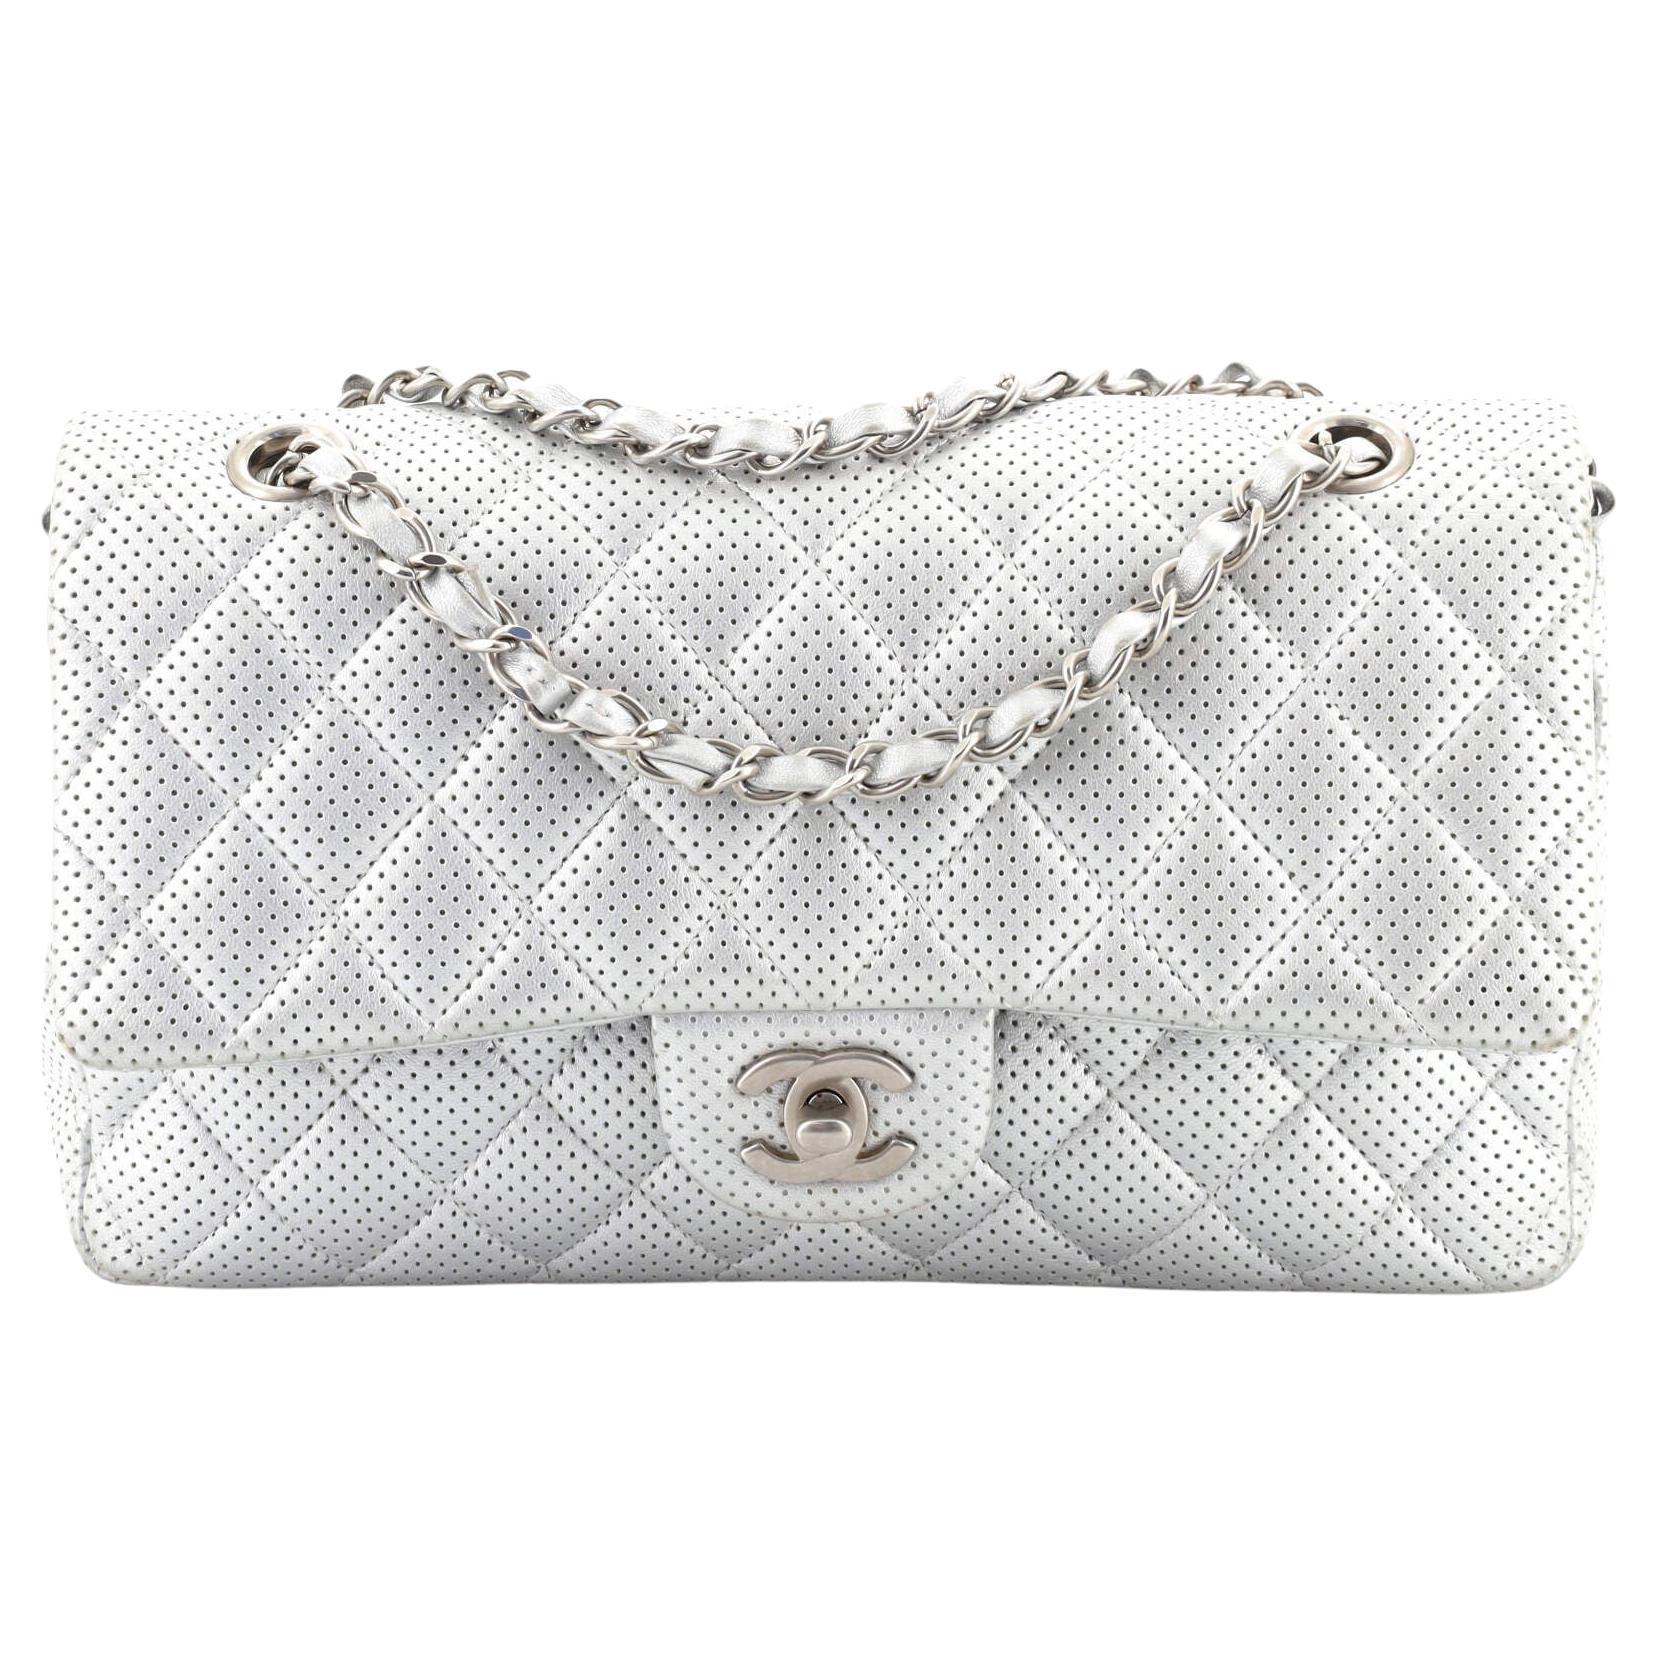 Chanel Classic Double Flap Bag Quilted Perforated Lambskin Medium